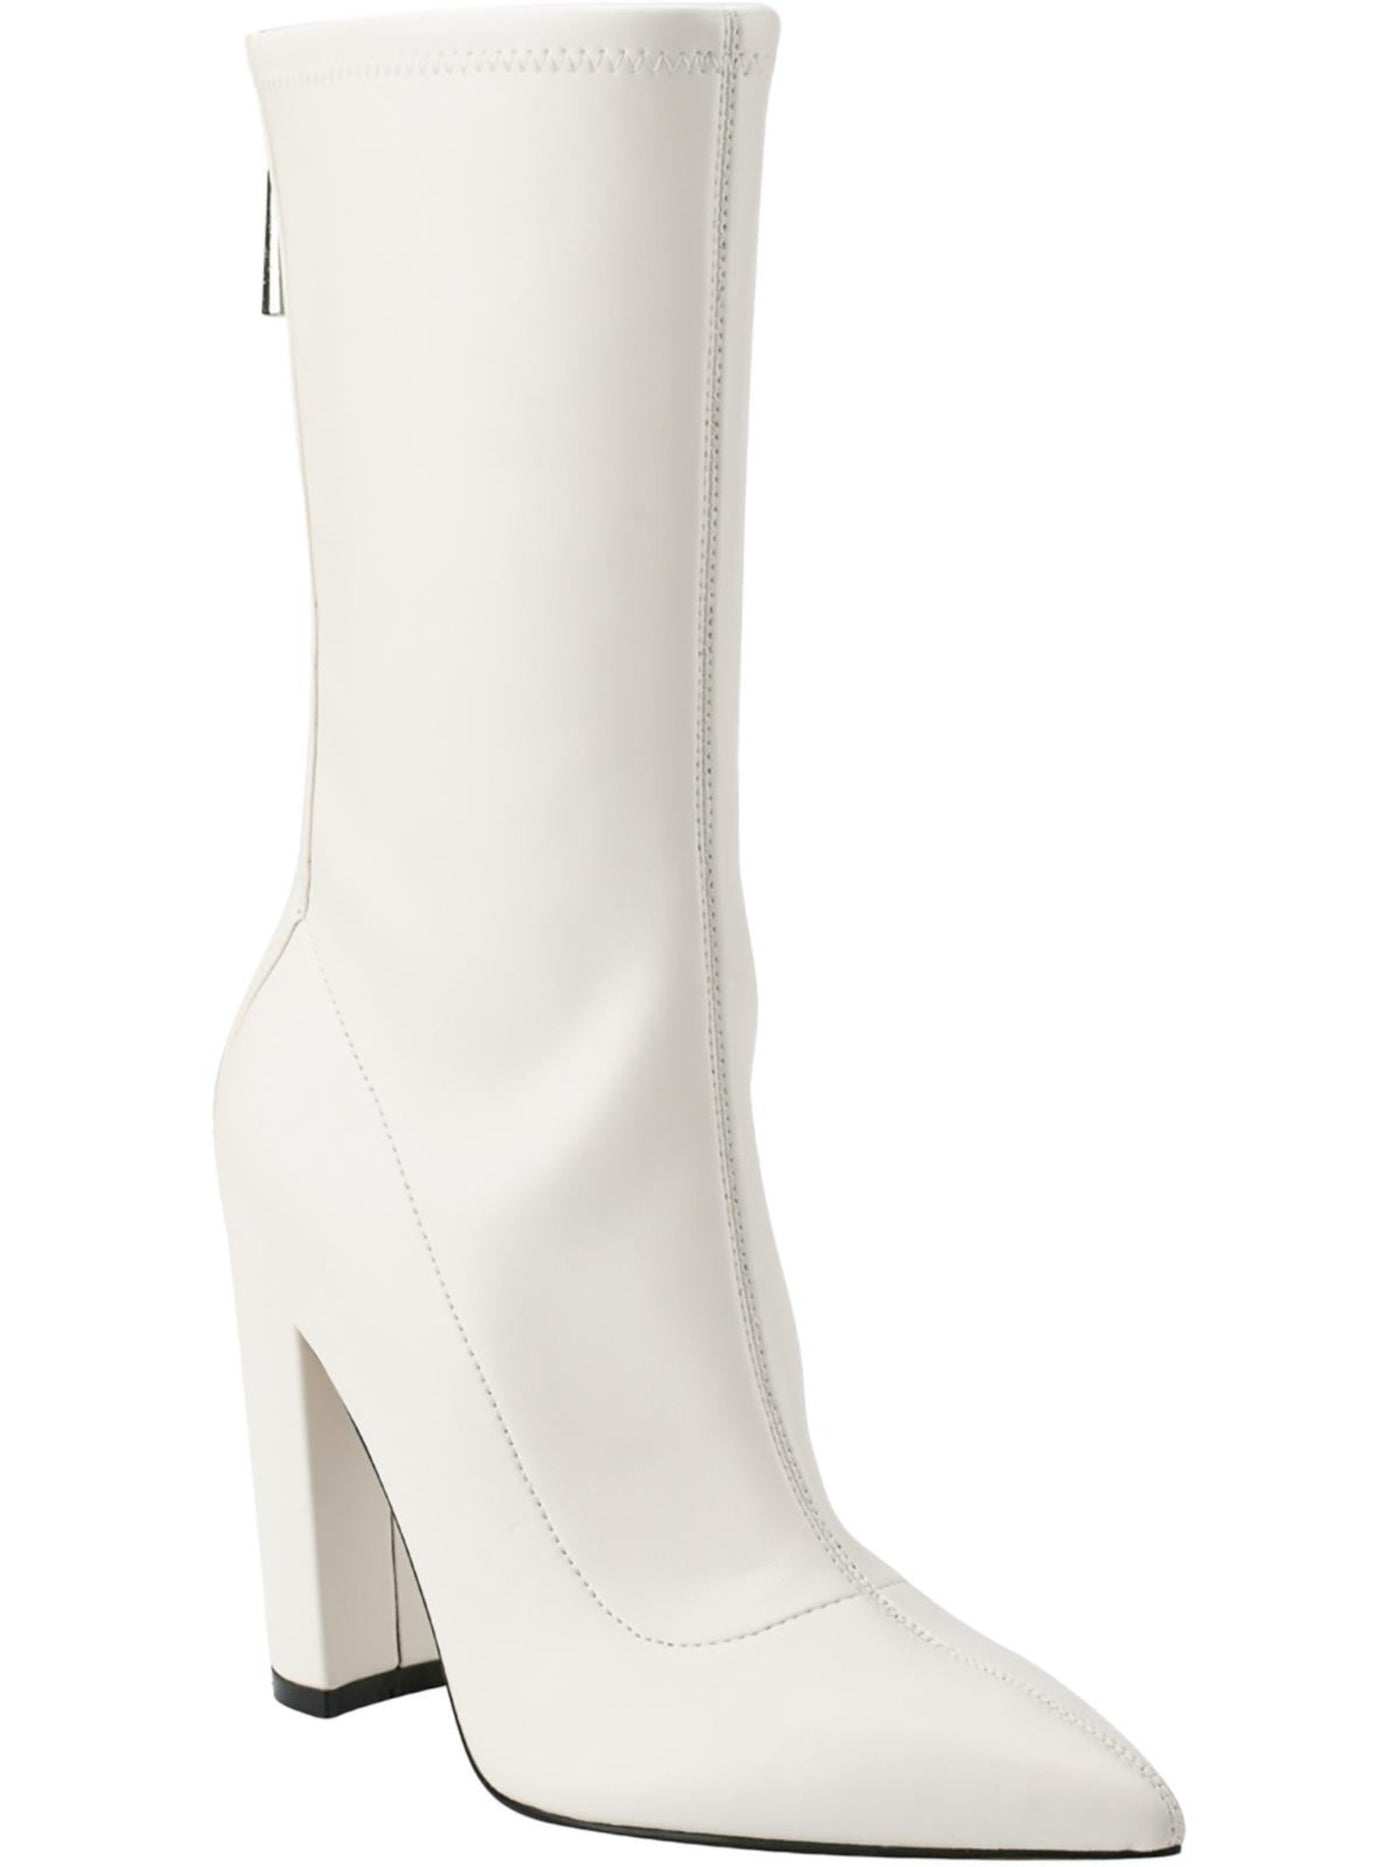 GUESS Womens Ivory Abbale Pointy Toe Block Heel Zip-Up Dress Boots 8 M